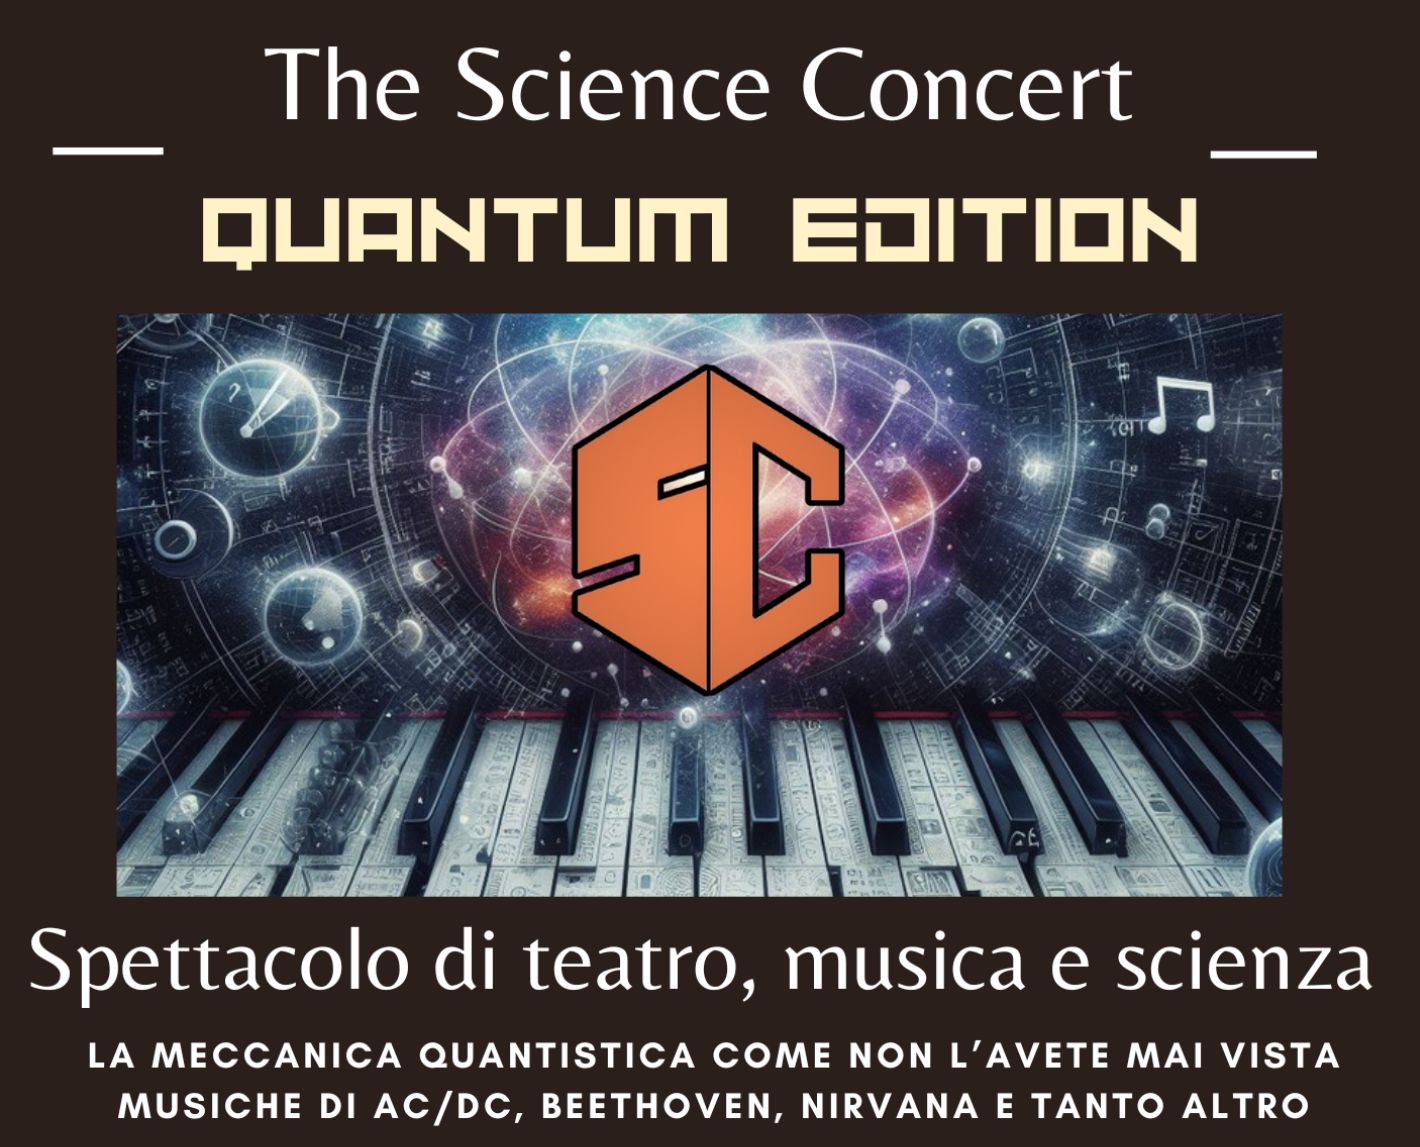 The Science Concert – Quantum Edition: an interdisciplinary journey through music and science